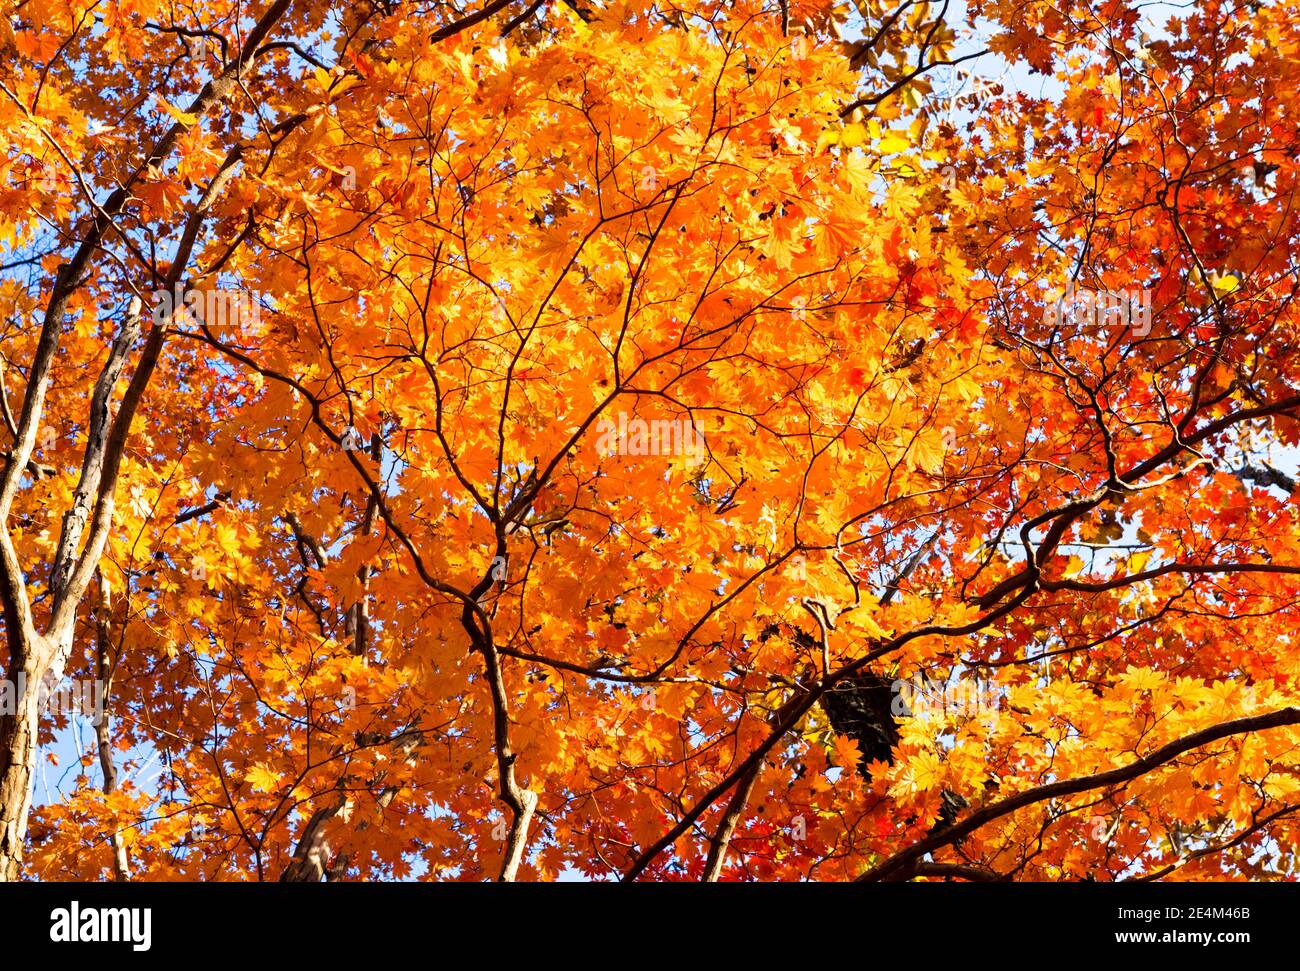 Autumn maple leaves background. Branches of an autumn red maple. leaves on a maple tree branch that are turning red and orange in fall. Stock Photo